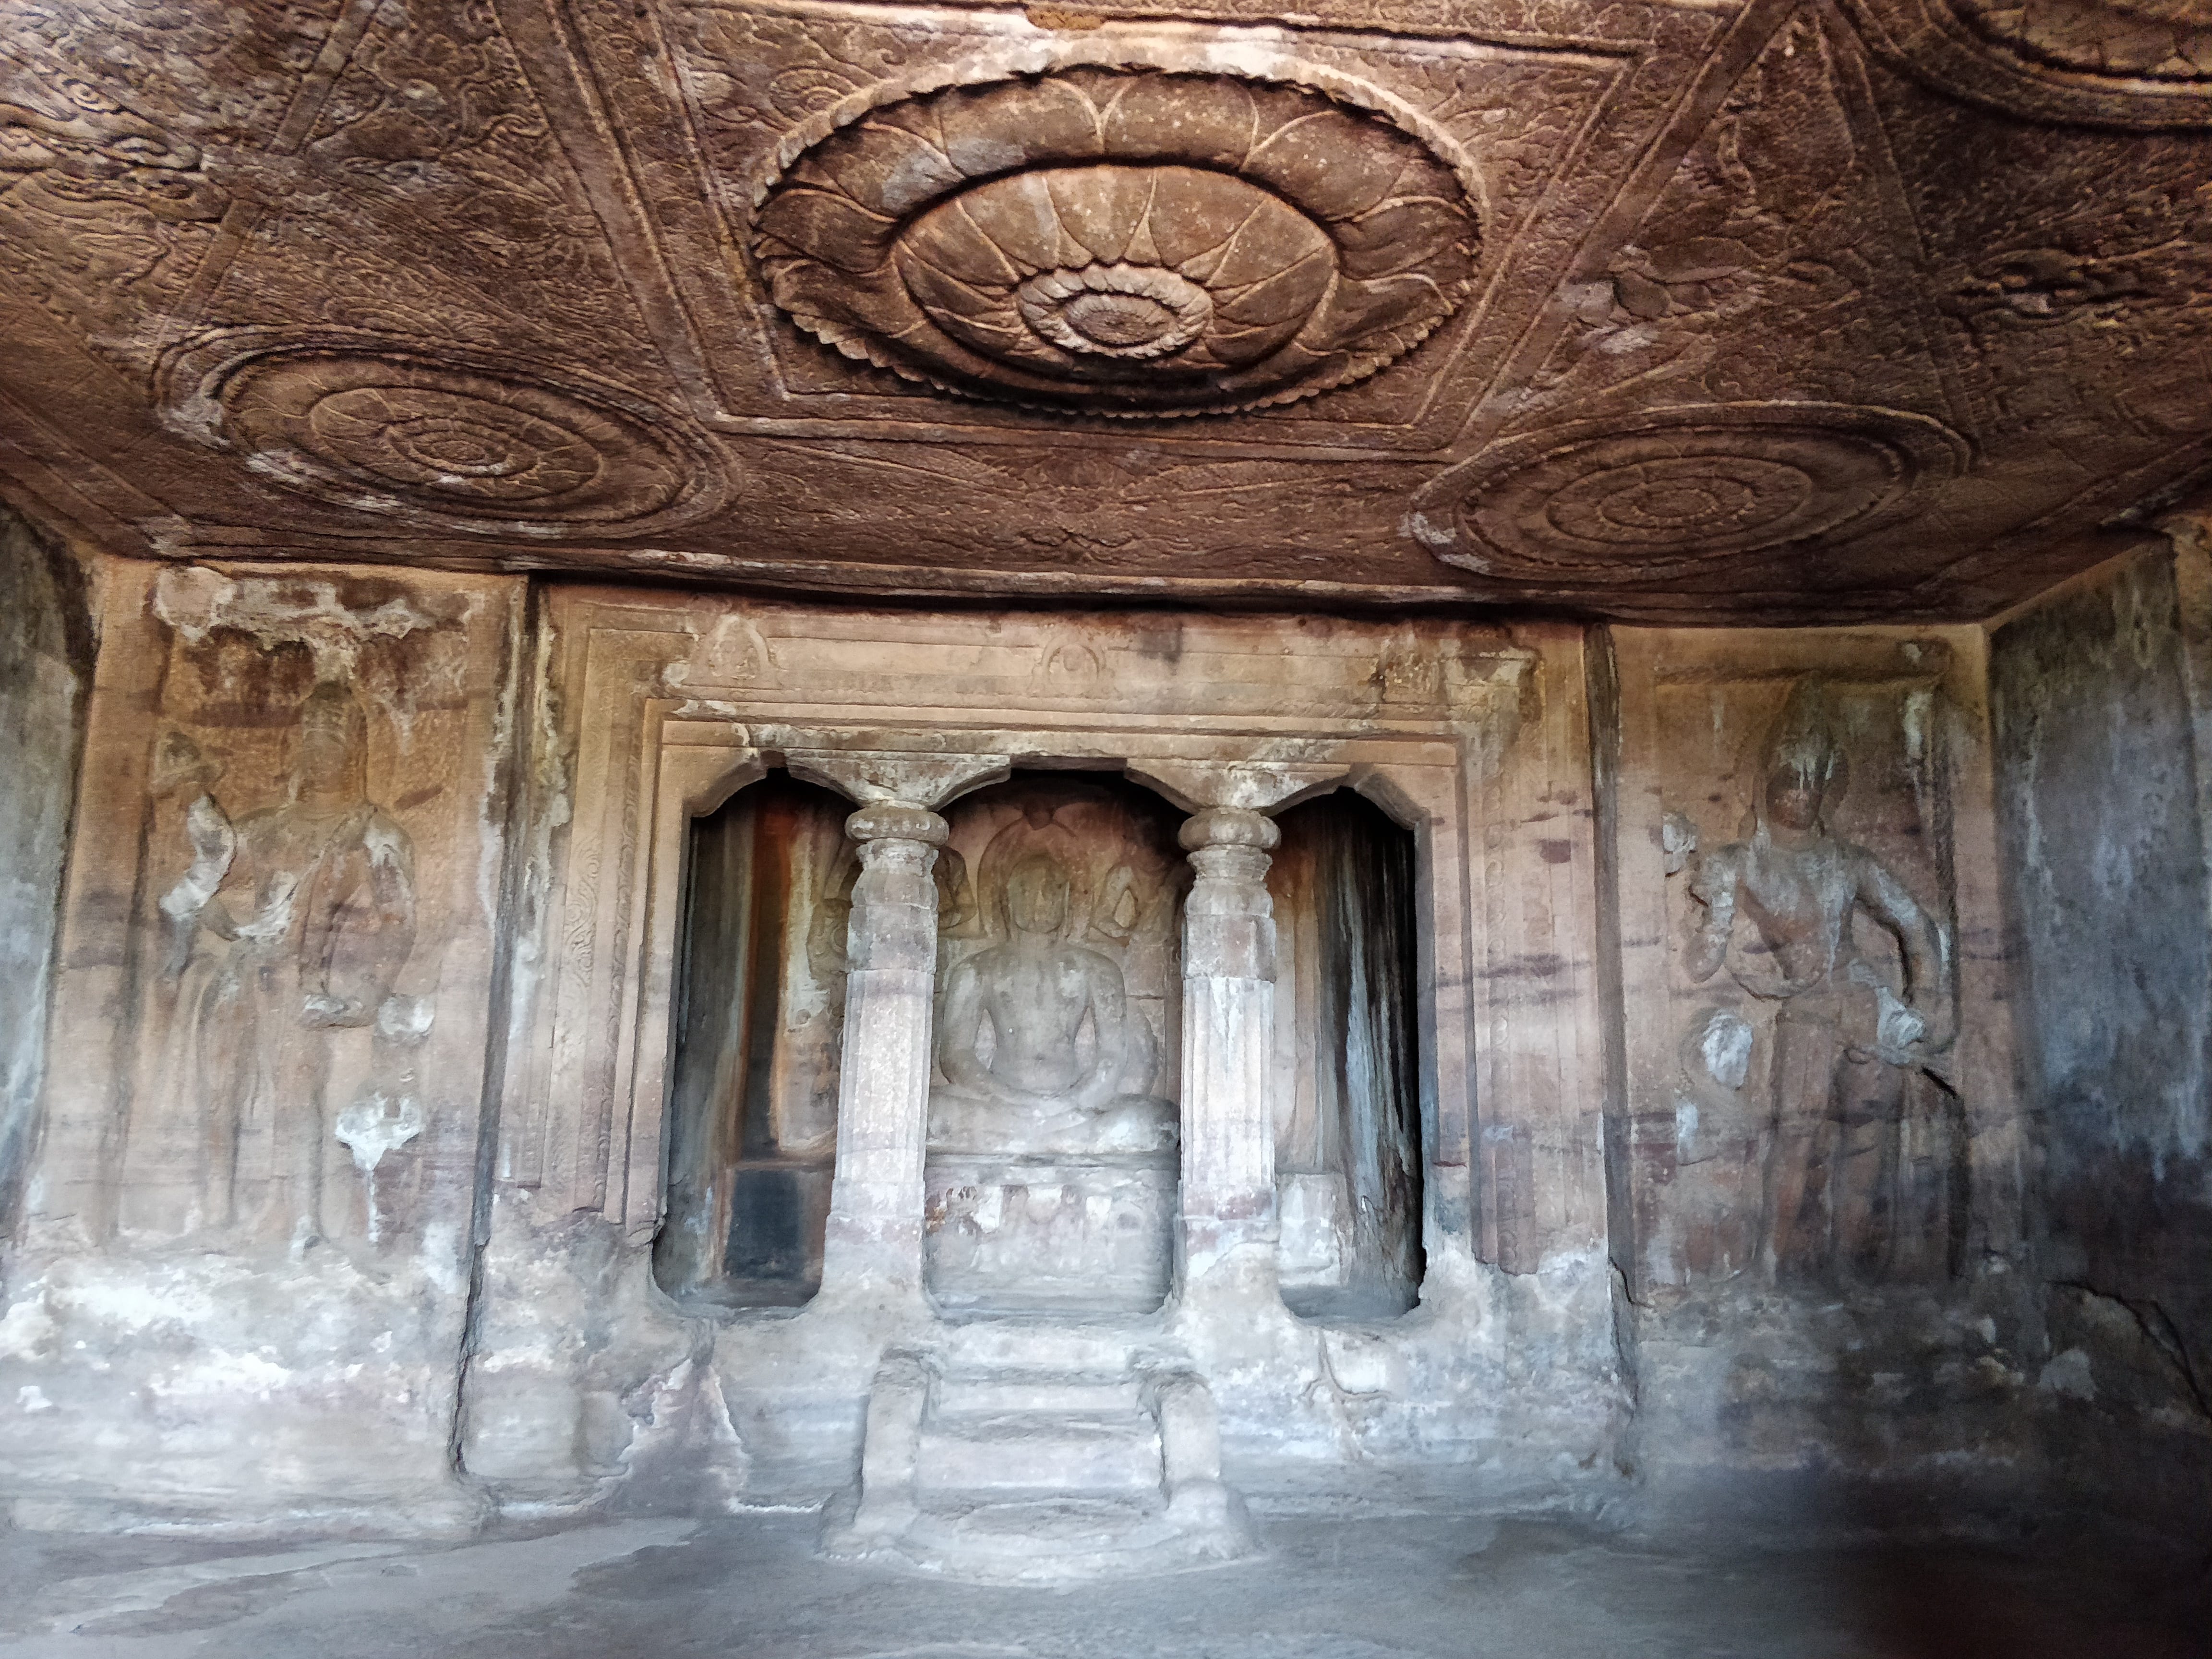 inside the Digambar rock-cut temple. Even the roof had lot of intricate designs